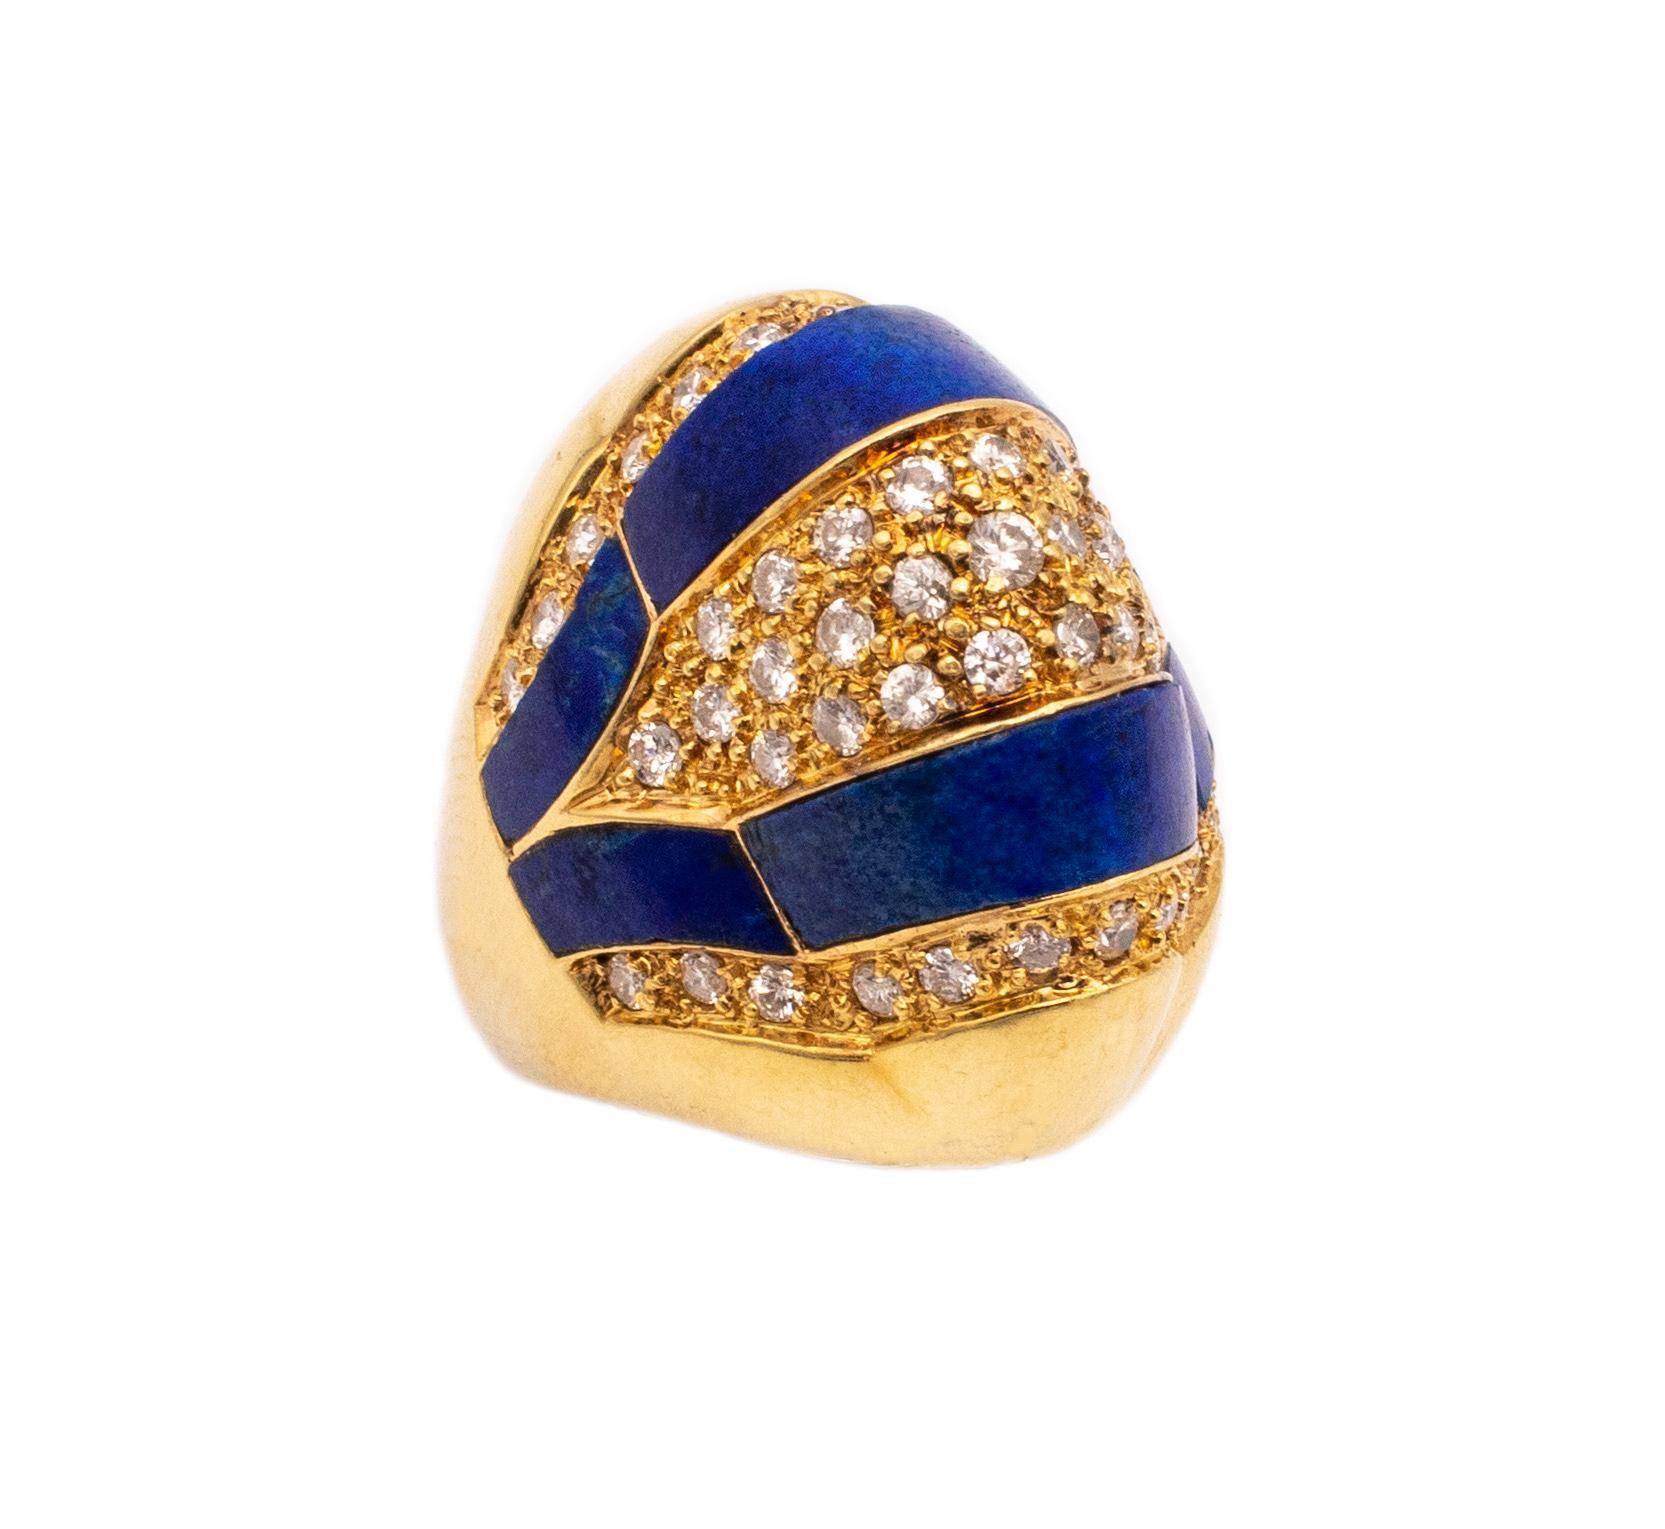 Bombe cocktail ring from the Mid-Century.

An Italian retro piece from the mid-century period, circa 1960's. Designed with a geometric bombe shape, with a wavy patterns. This cocktail ring was crafted in solid yellow gold of 18 karats, with high